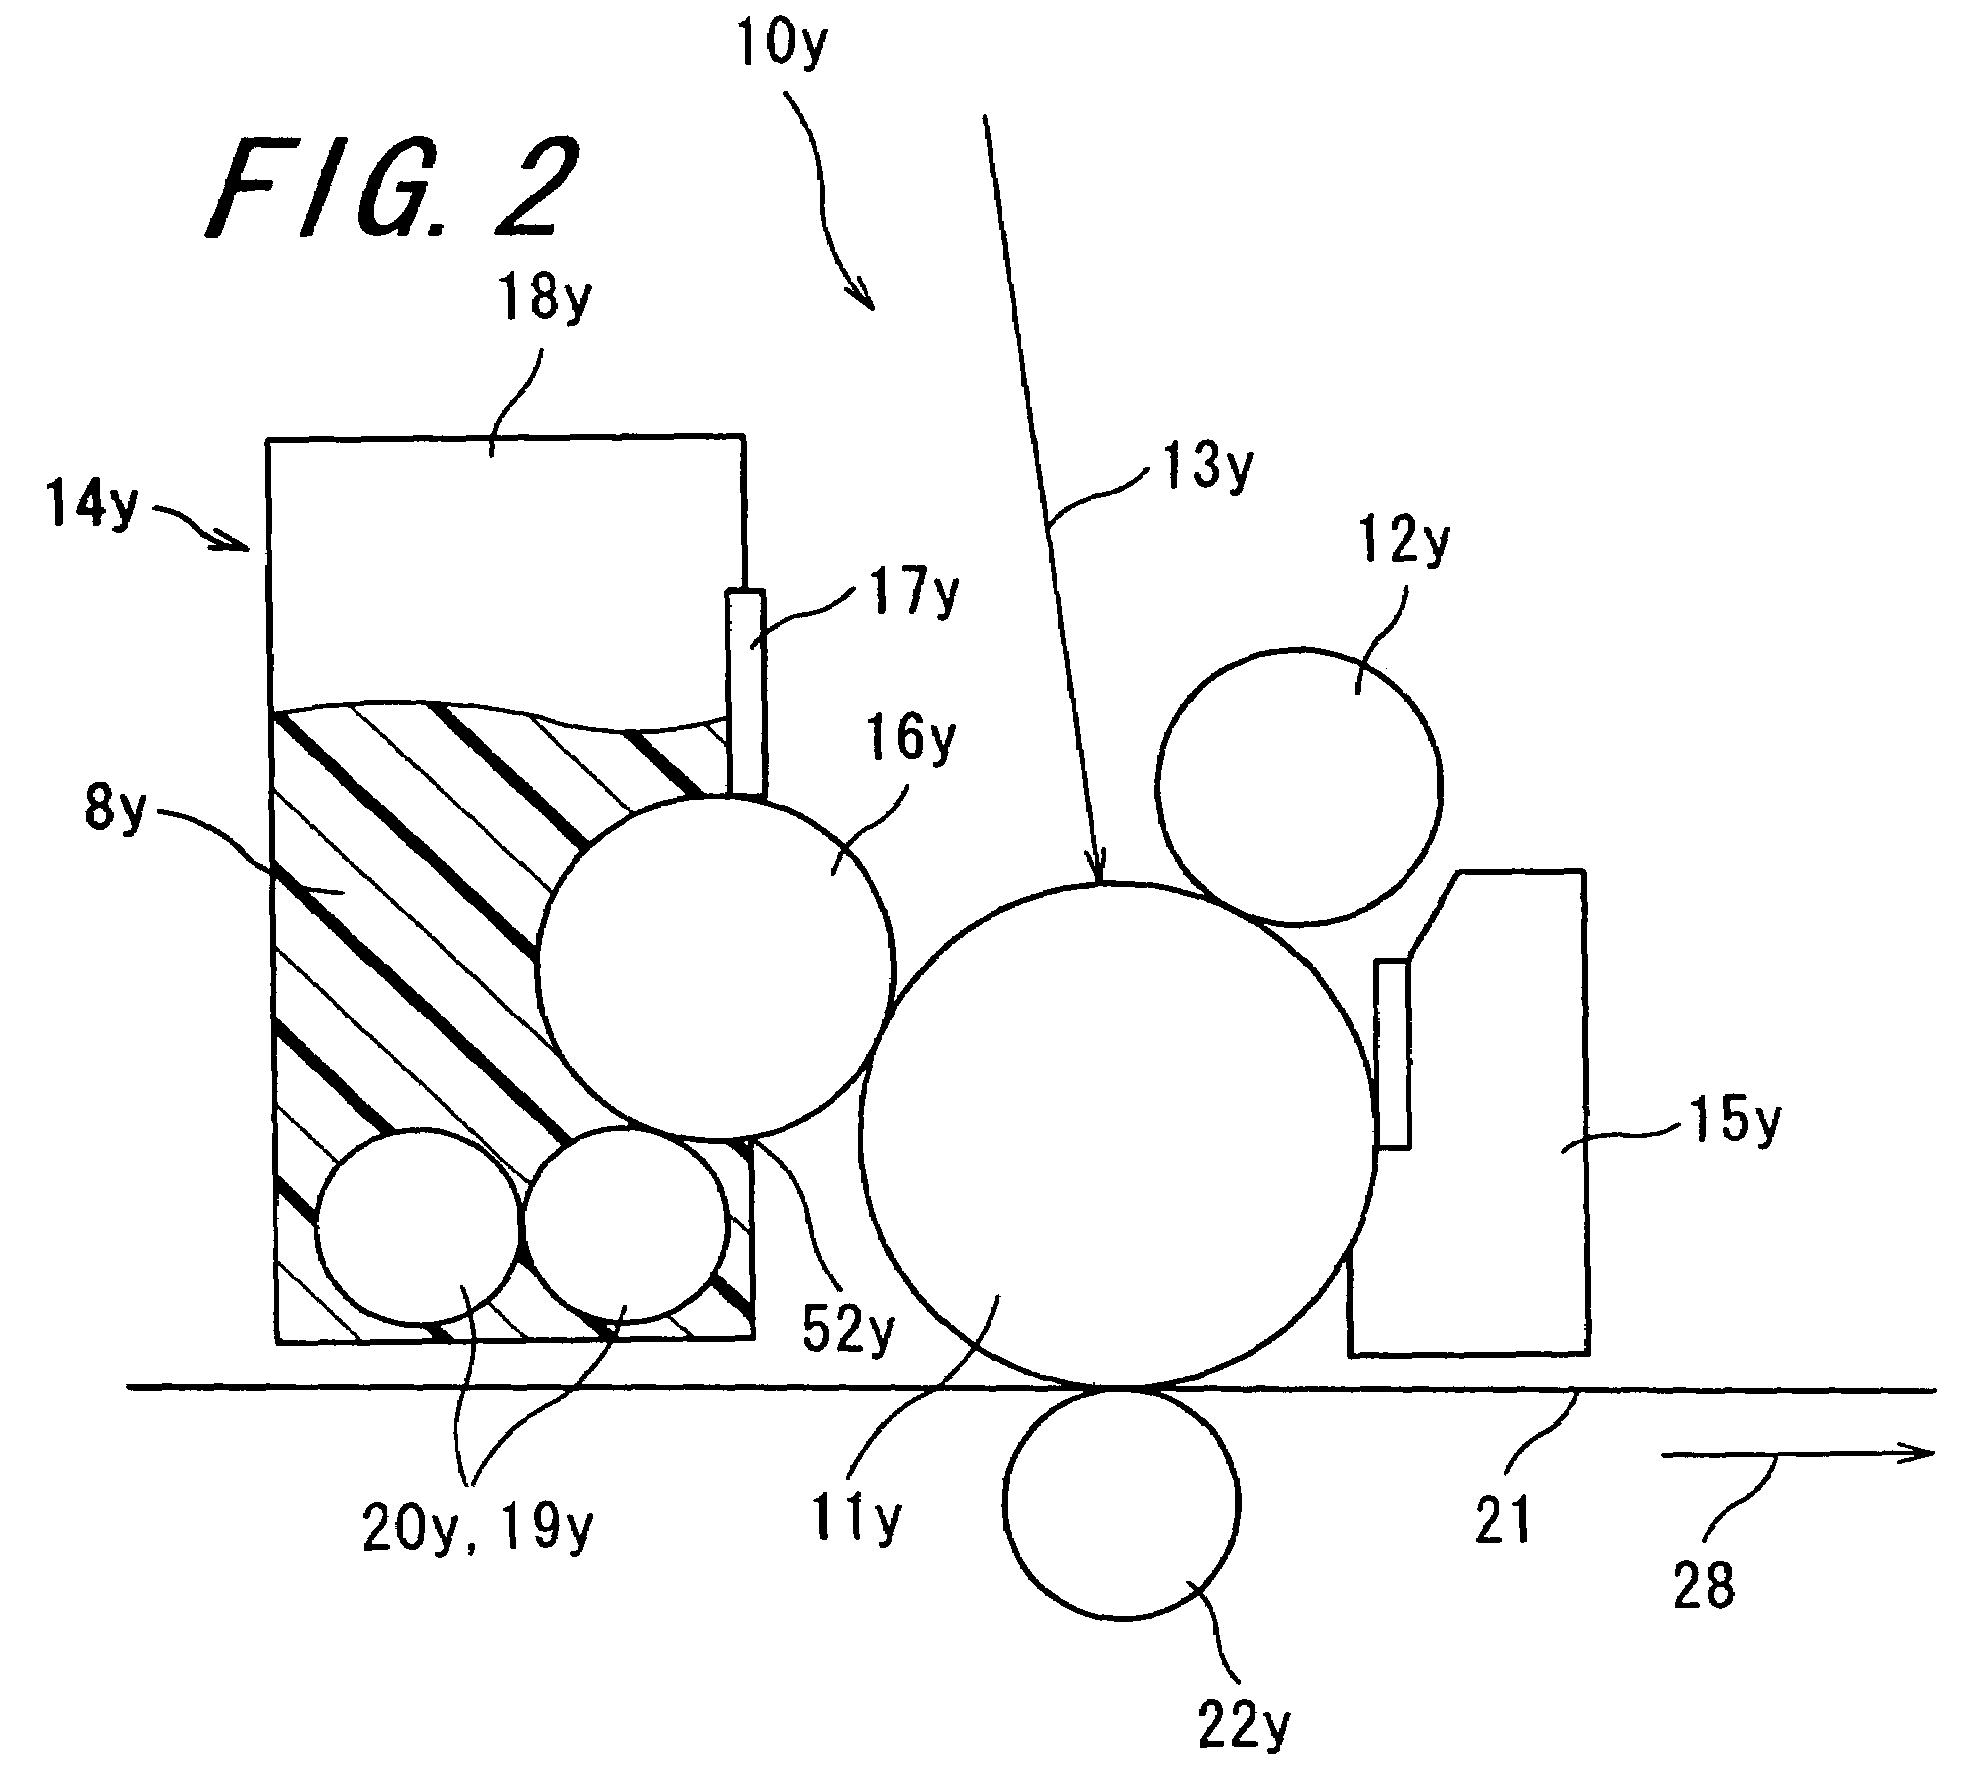 Image forming apparatus where the rotation and contact/release of a fixing fluid applying member is controlled